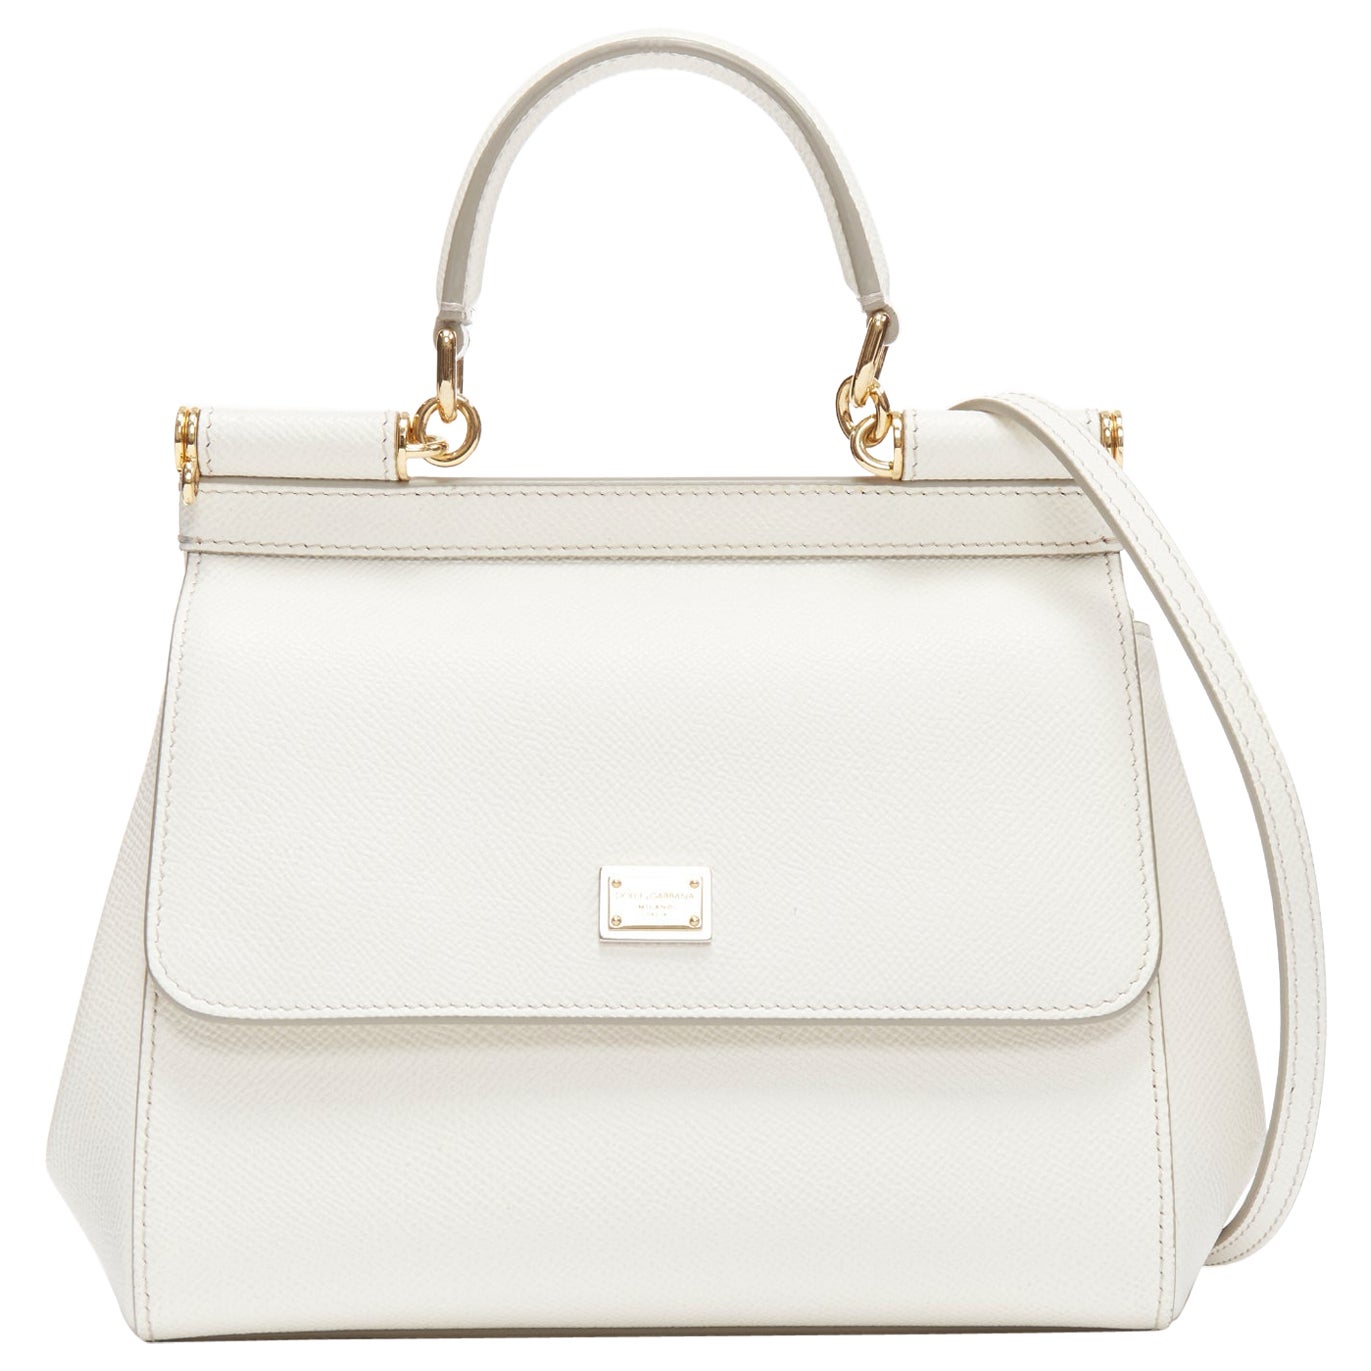 DOLCE GABBANA Sicily Small white leather top handle flap crossbody bag